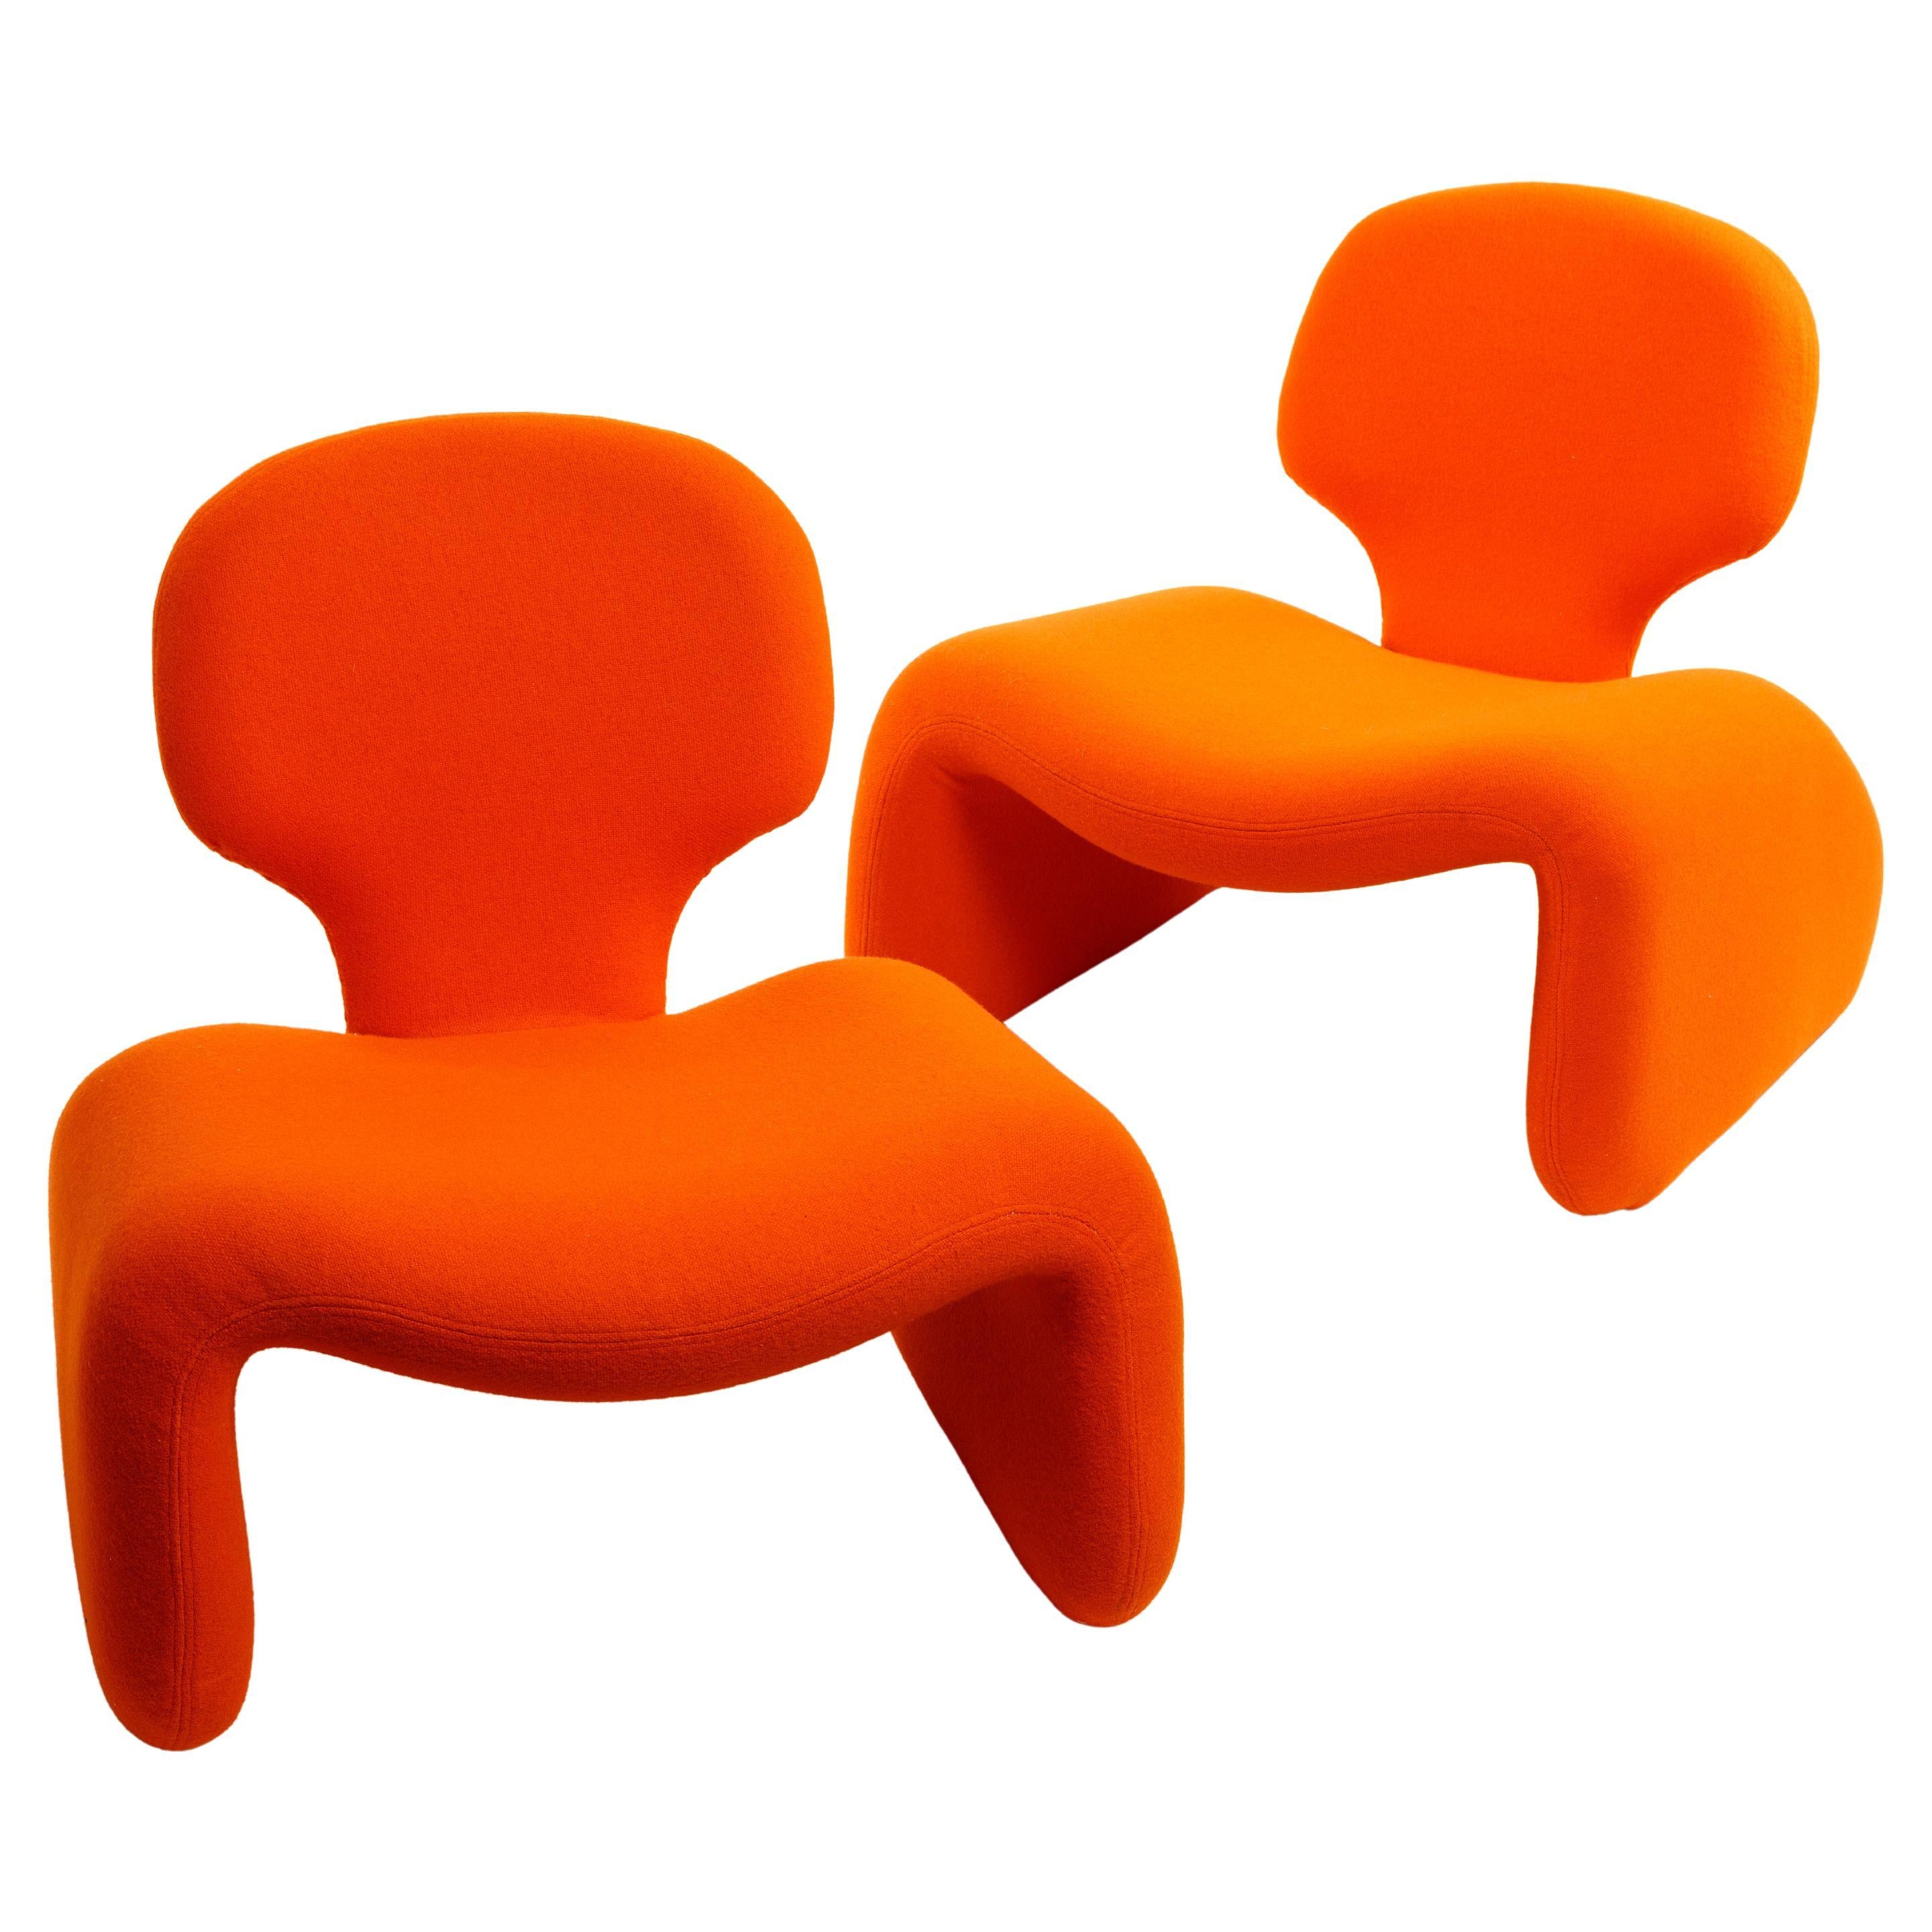 Olivier Mourgue Iconic Djinn Chair Airborne 1963 Reupholstered in Orange Kvadrat For Sale